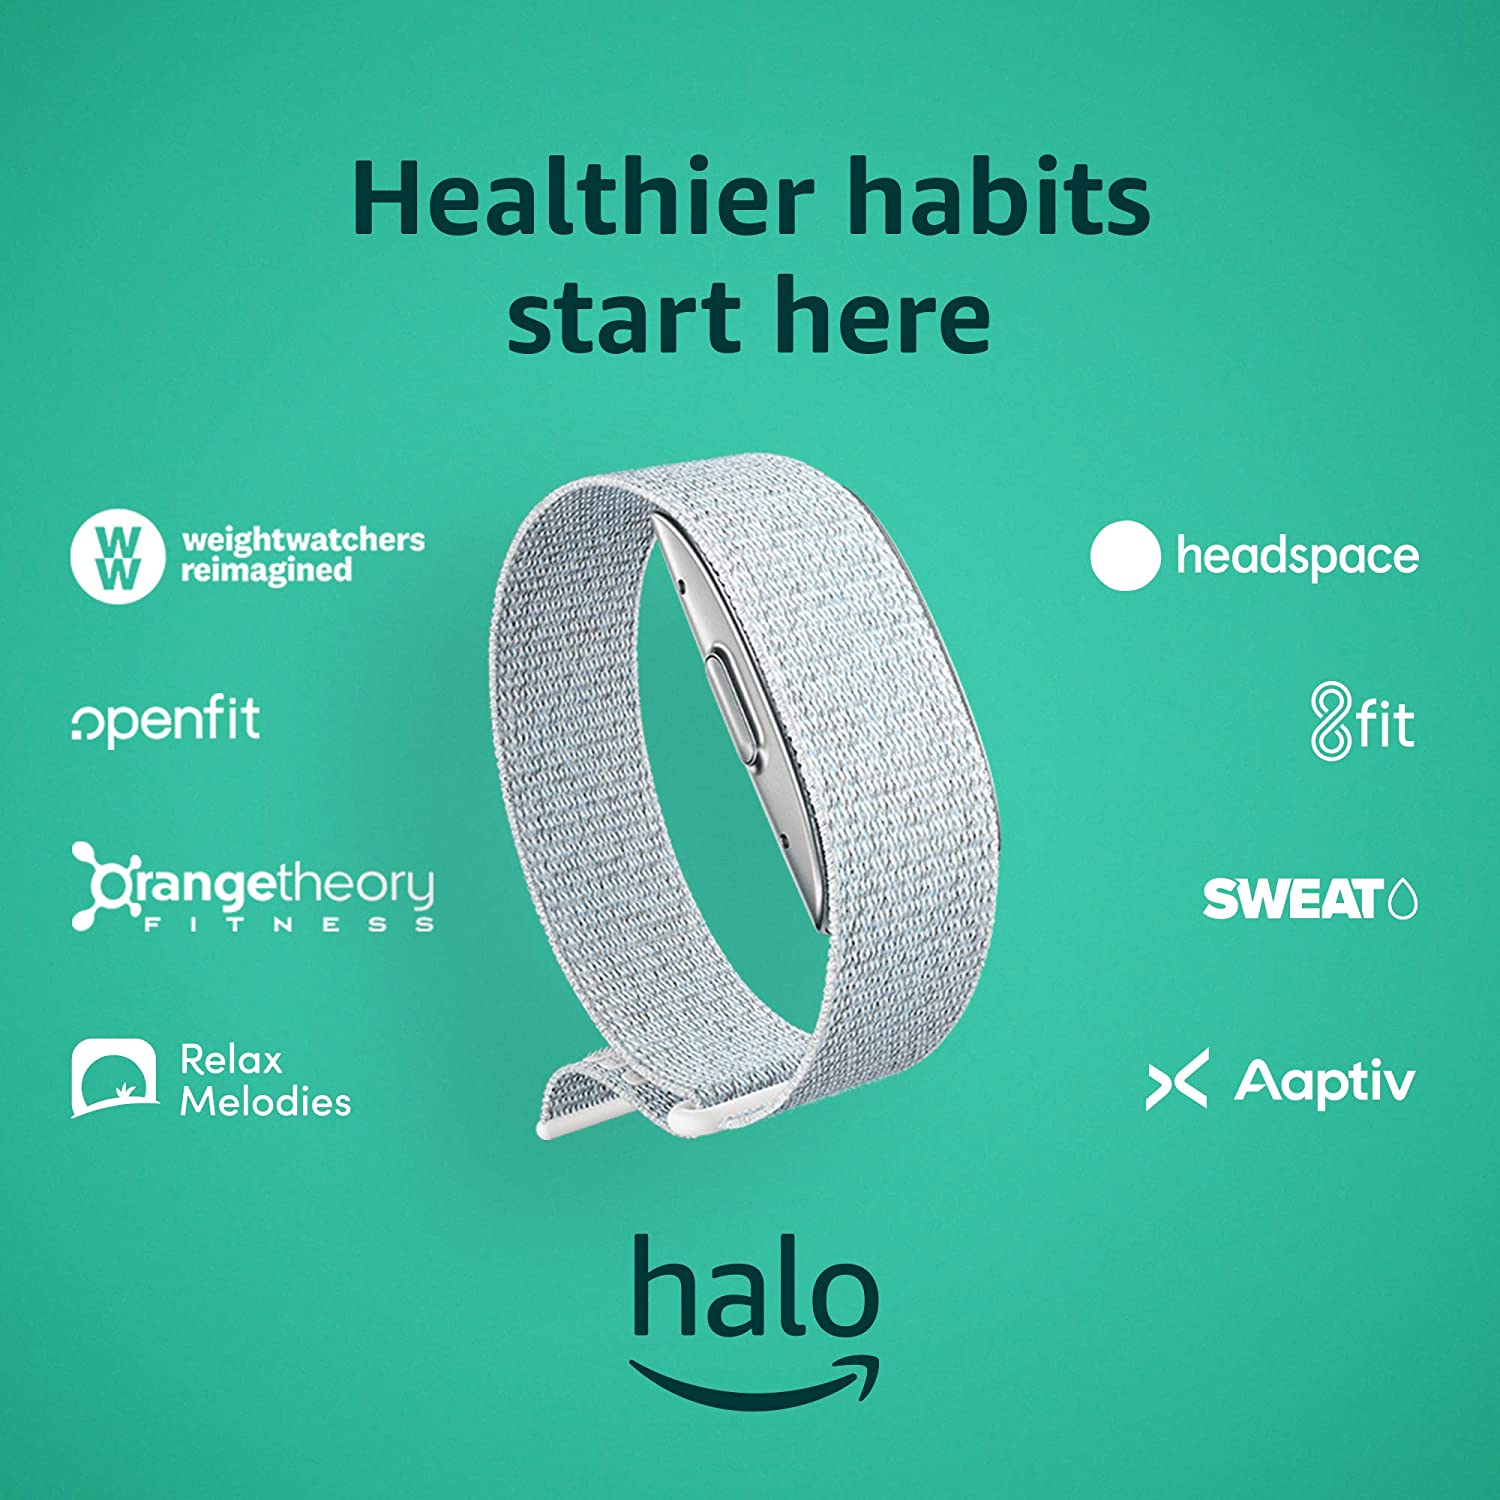 Amazon’s new Halo Health Bracelet Tells Users What’s Wrong with Them by Monitoring Voice Tone and Body Fat